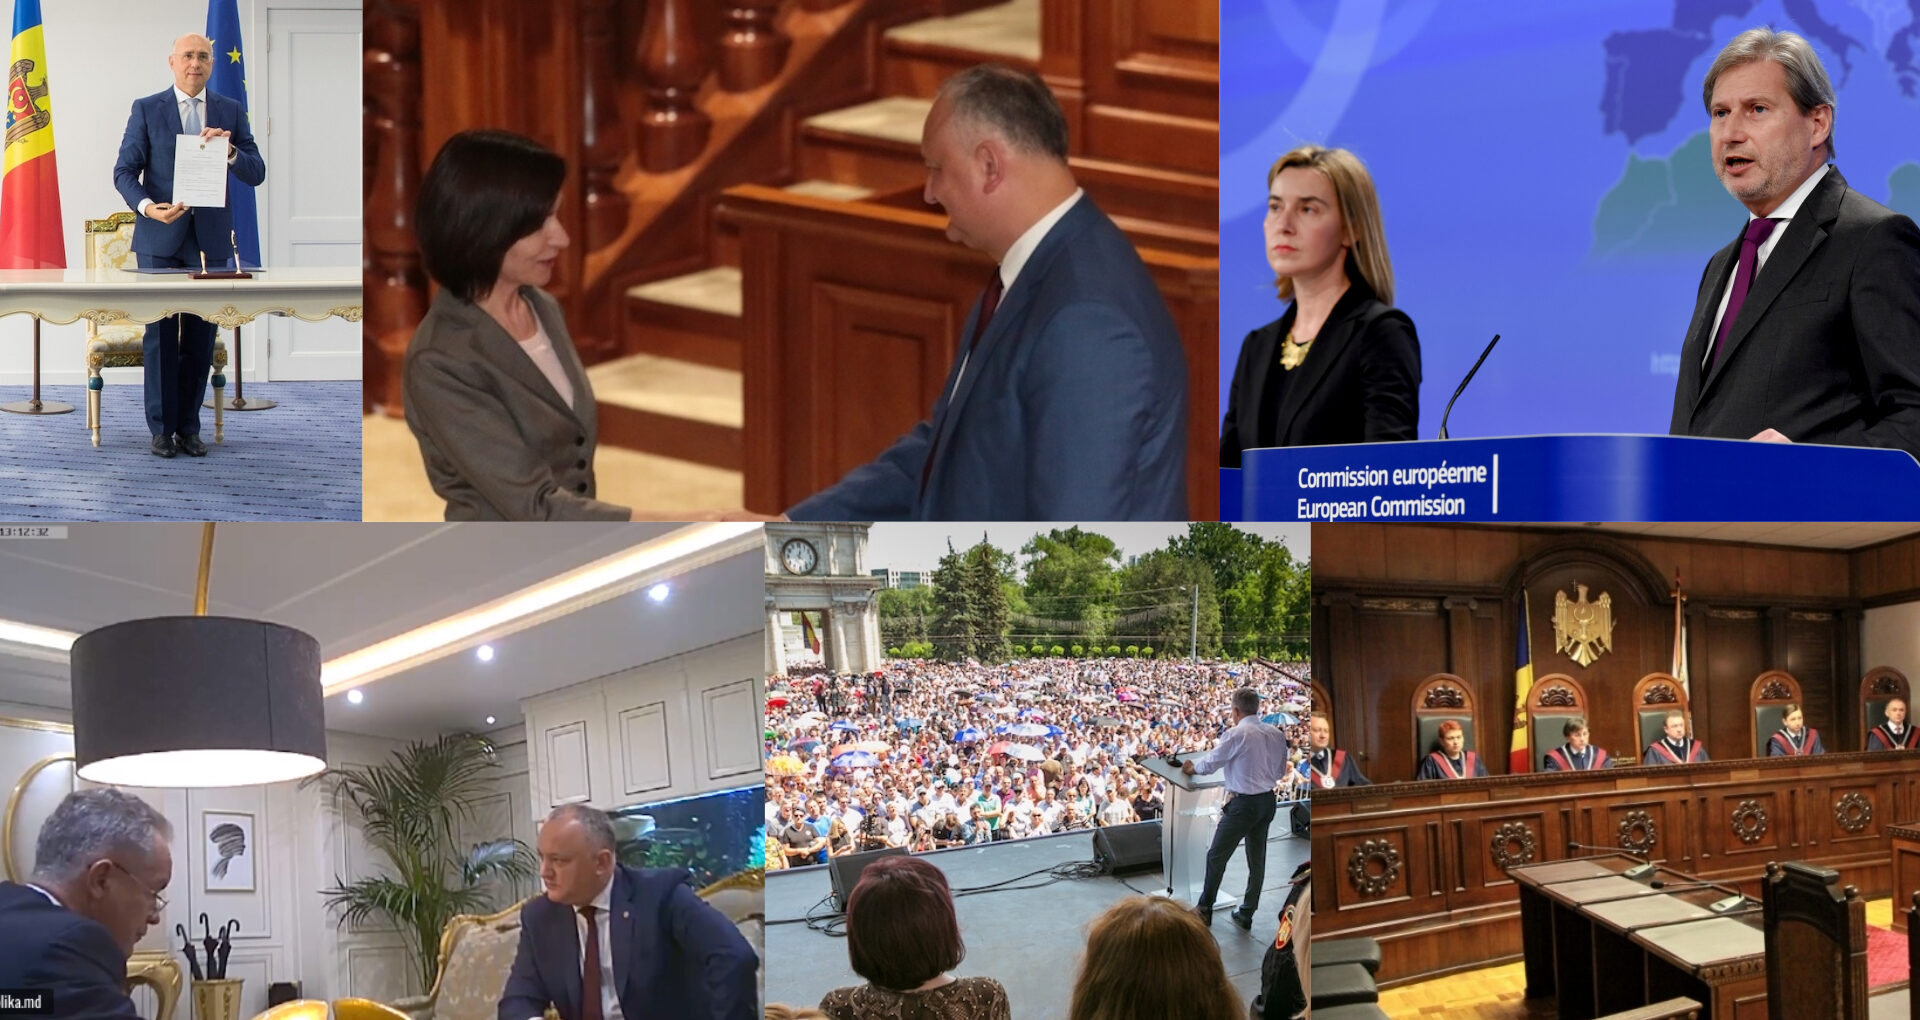 Weekend digest: From Constitutional Court decisions to EU recognition of the new Government